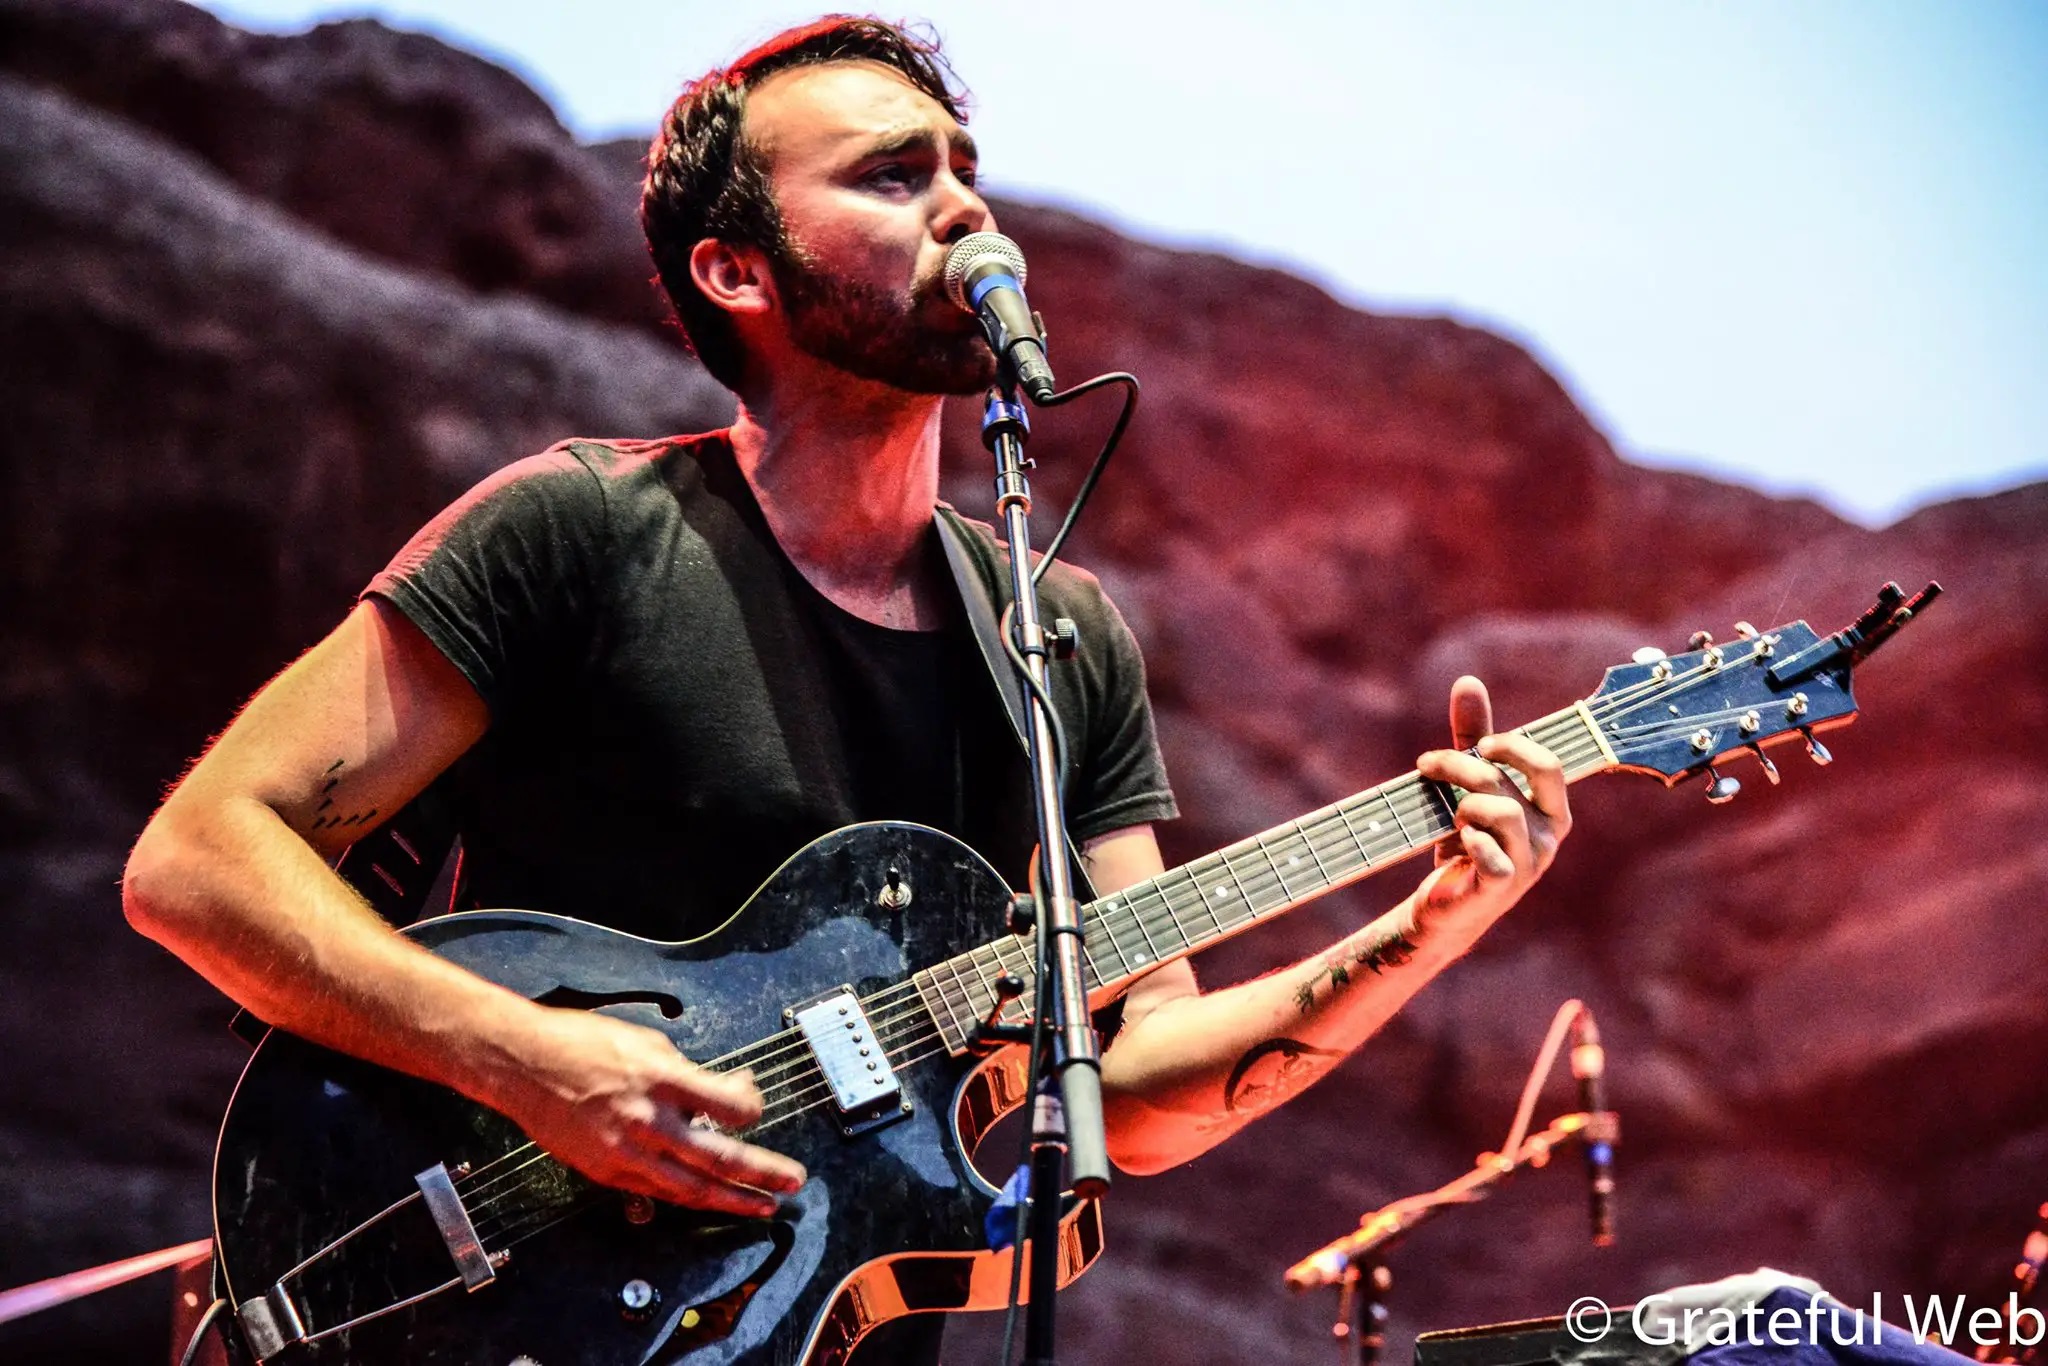 Shakey Graves Unveils "Ready or Not" Live Video Featuring Sierra Ferrell from Red Rocks